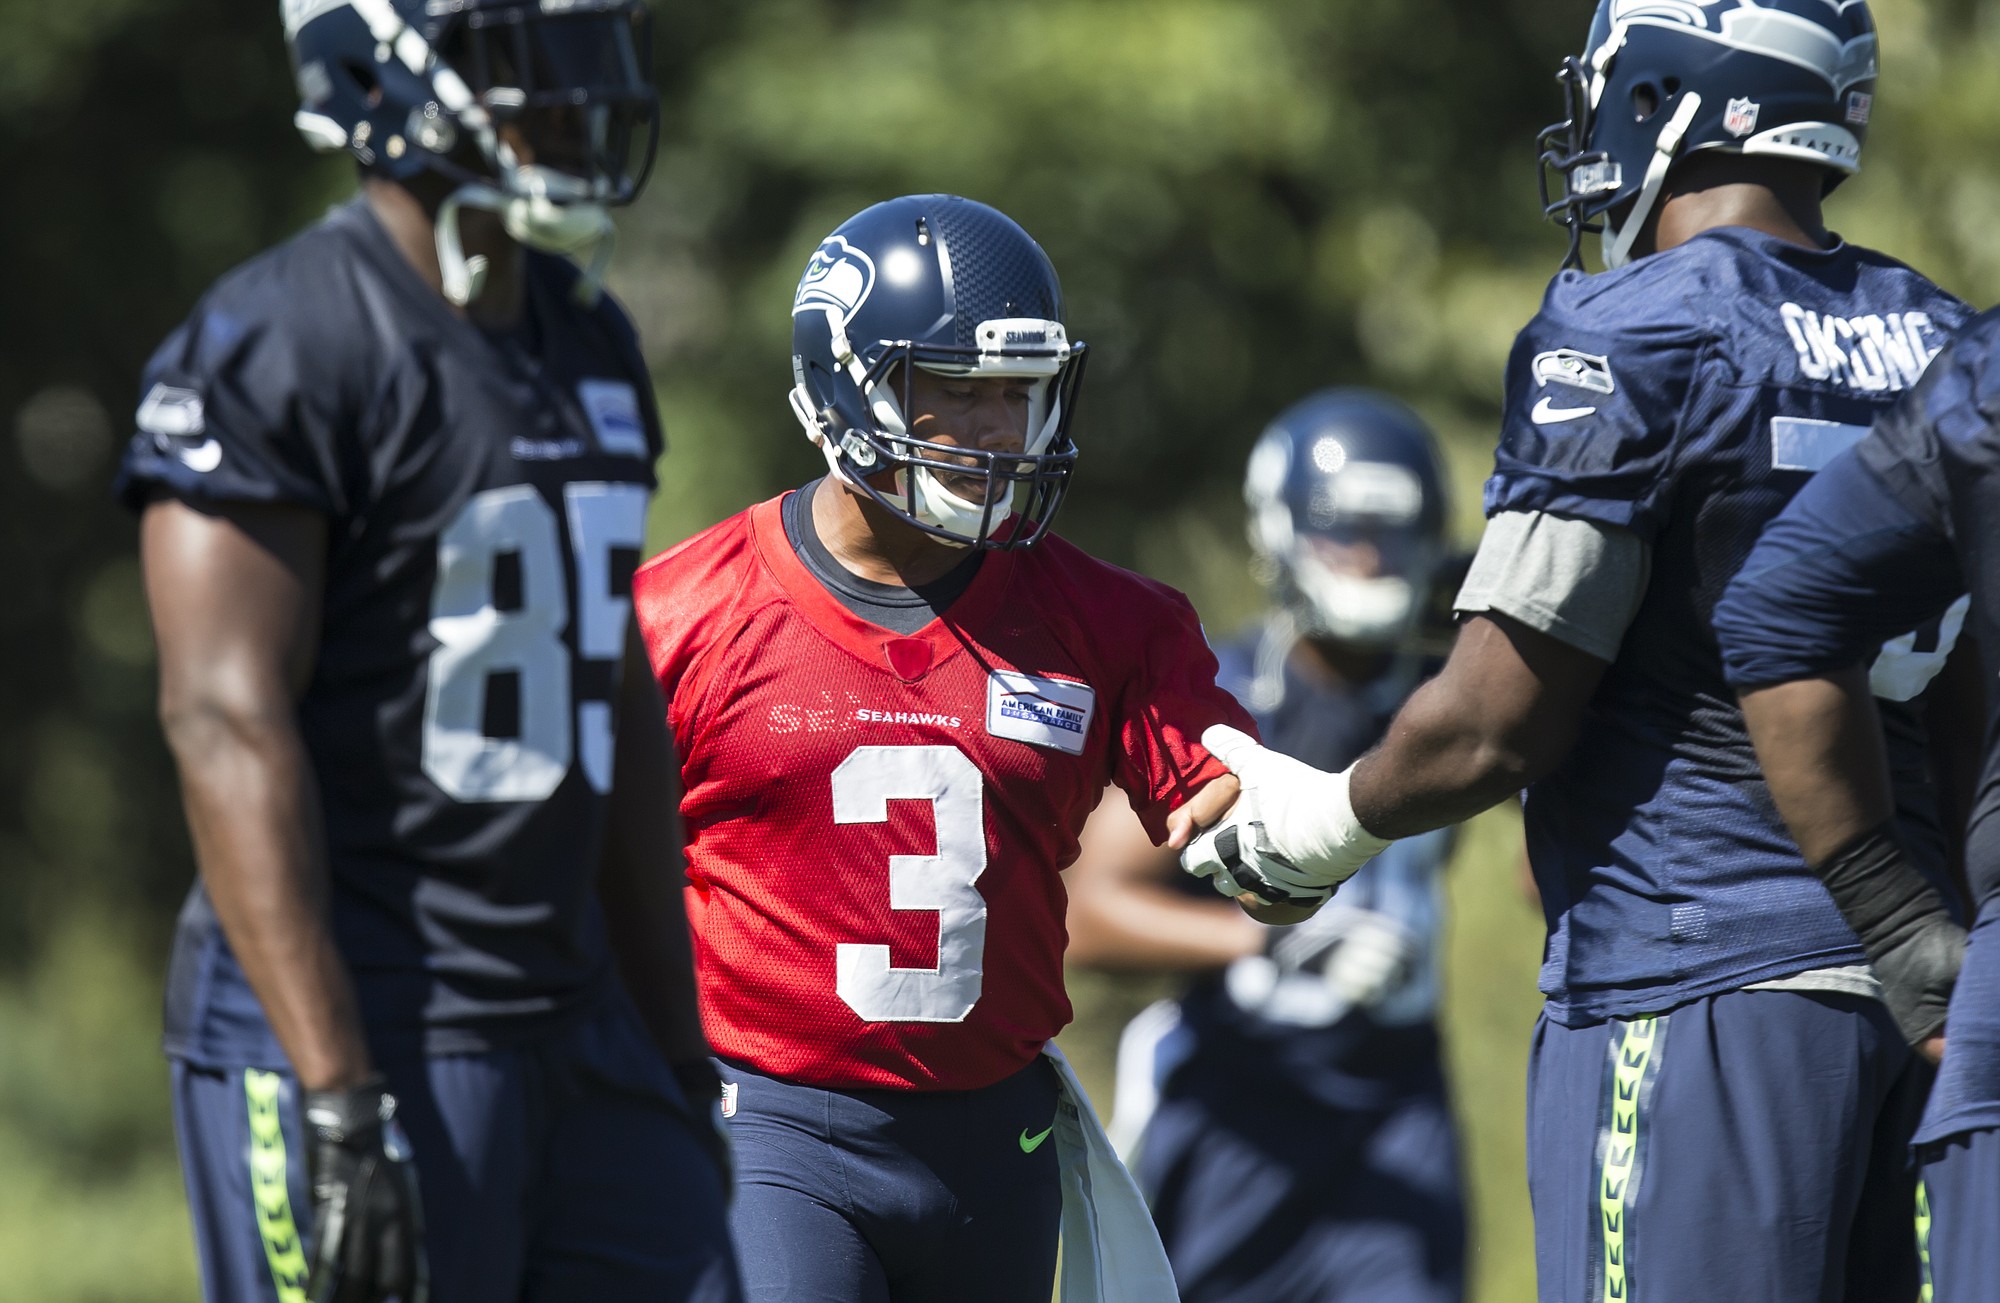 Seattle Seahawks quarterback Russell Wilson, center, shakes hands with offensive lineman Russell Okung during the first day of training camp on Friday, July 31, 2015, in Renton.